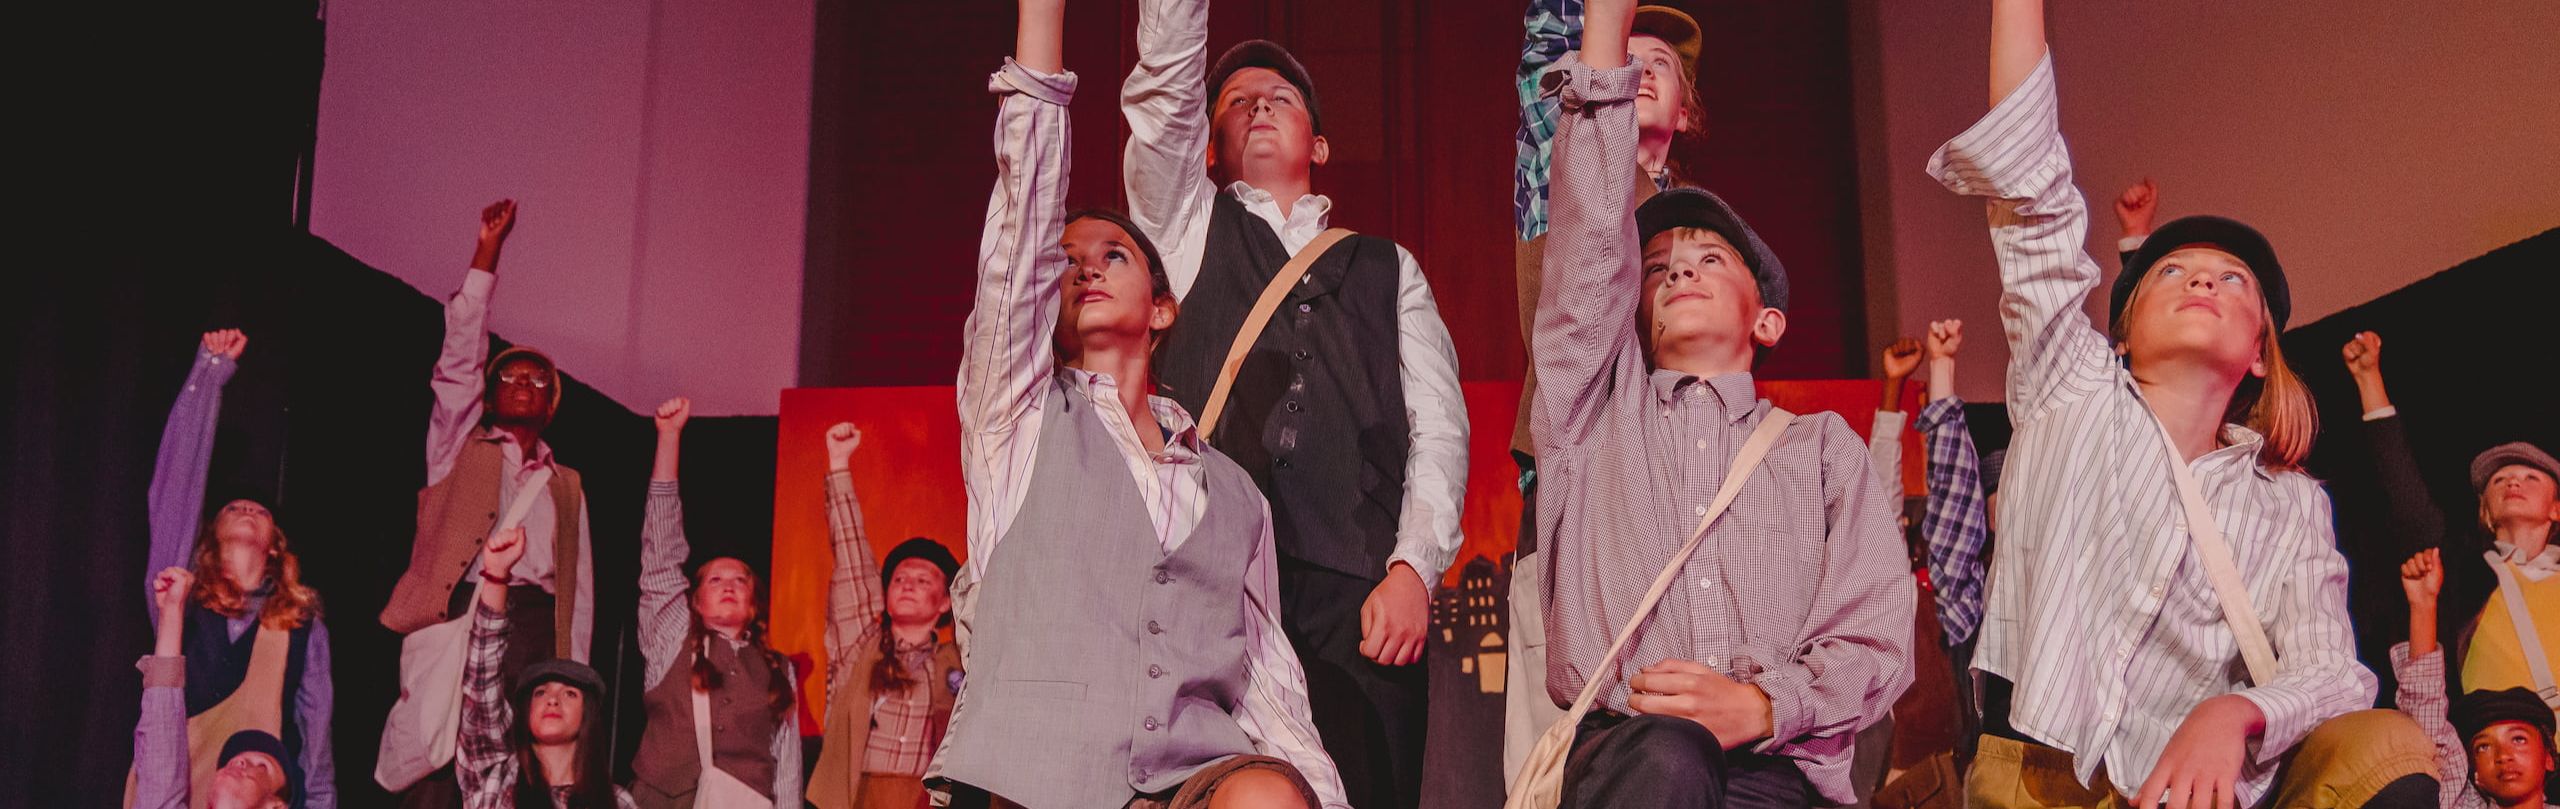 A dynamic group of middle school students, dressed in period costumes, raise their fists in unity during a spirited theater performance on stage, showcasing their acting talents.